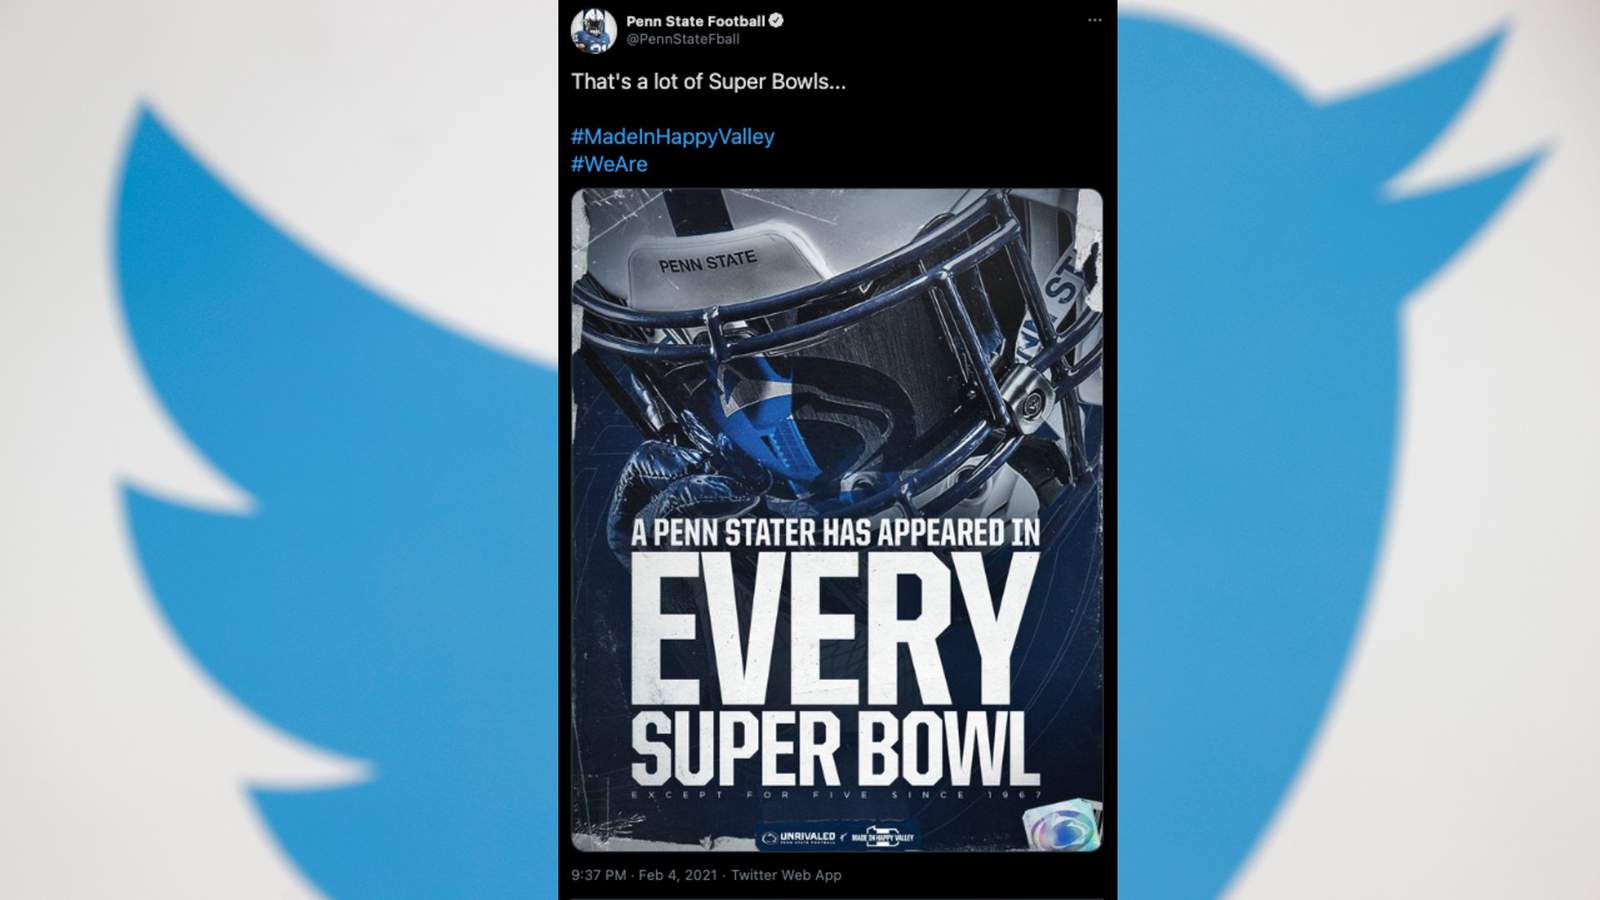 Internet comes together to mock Penn State football for hilariously bad Super Bowl graphic